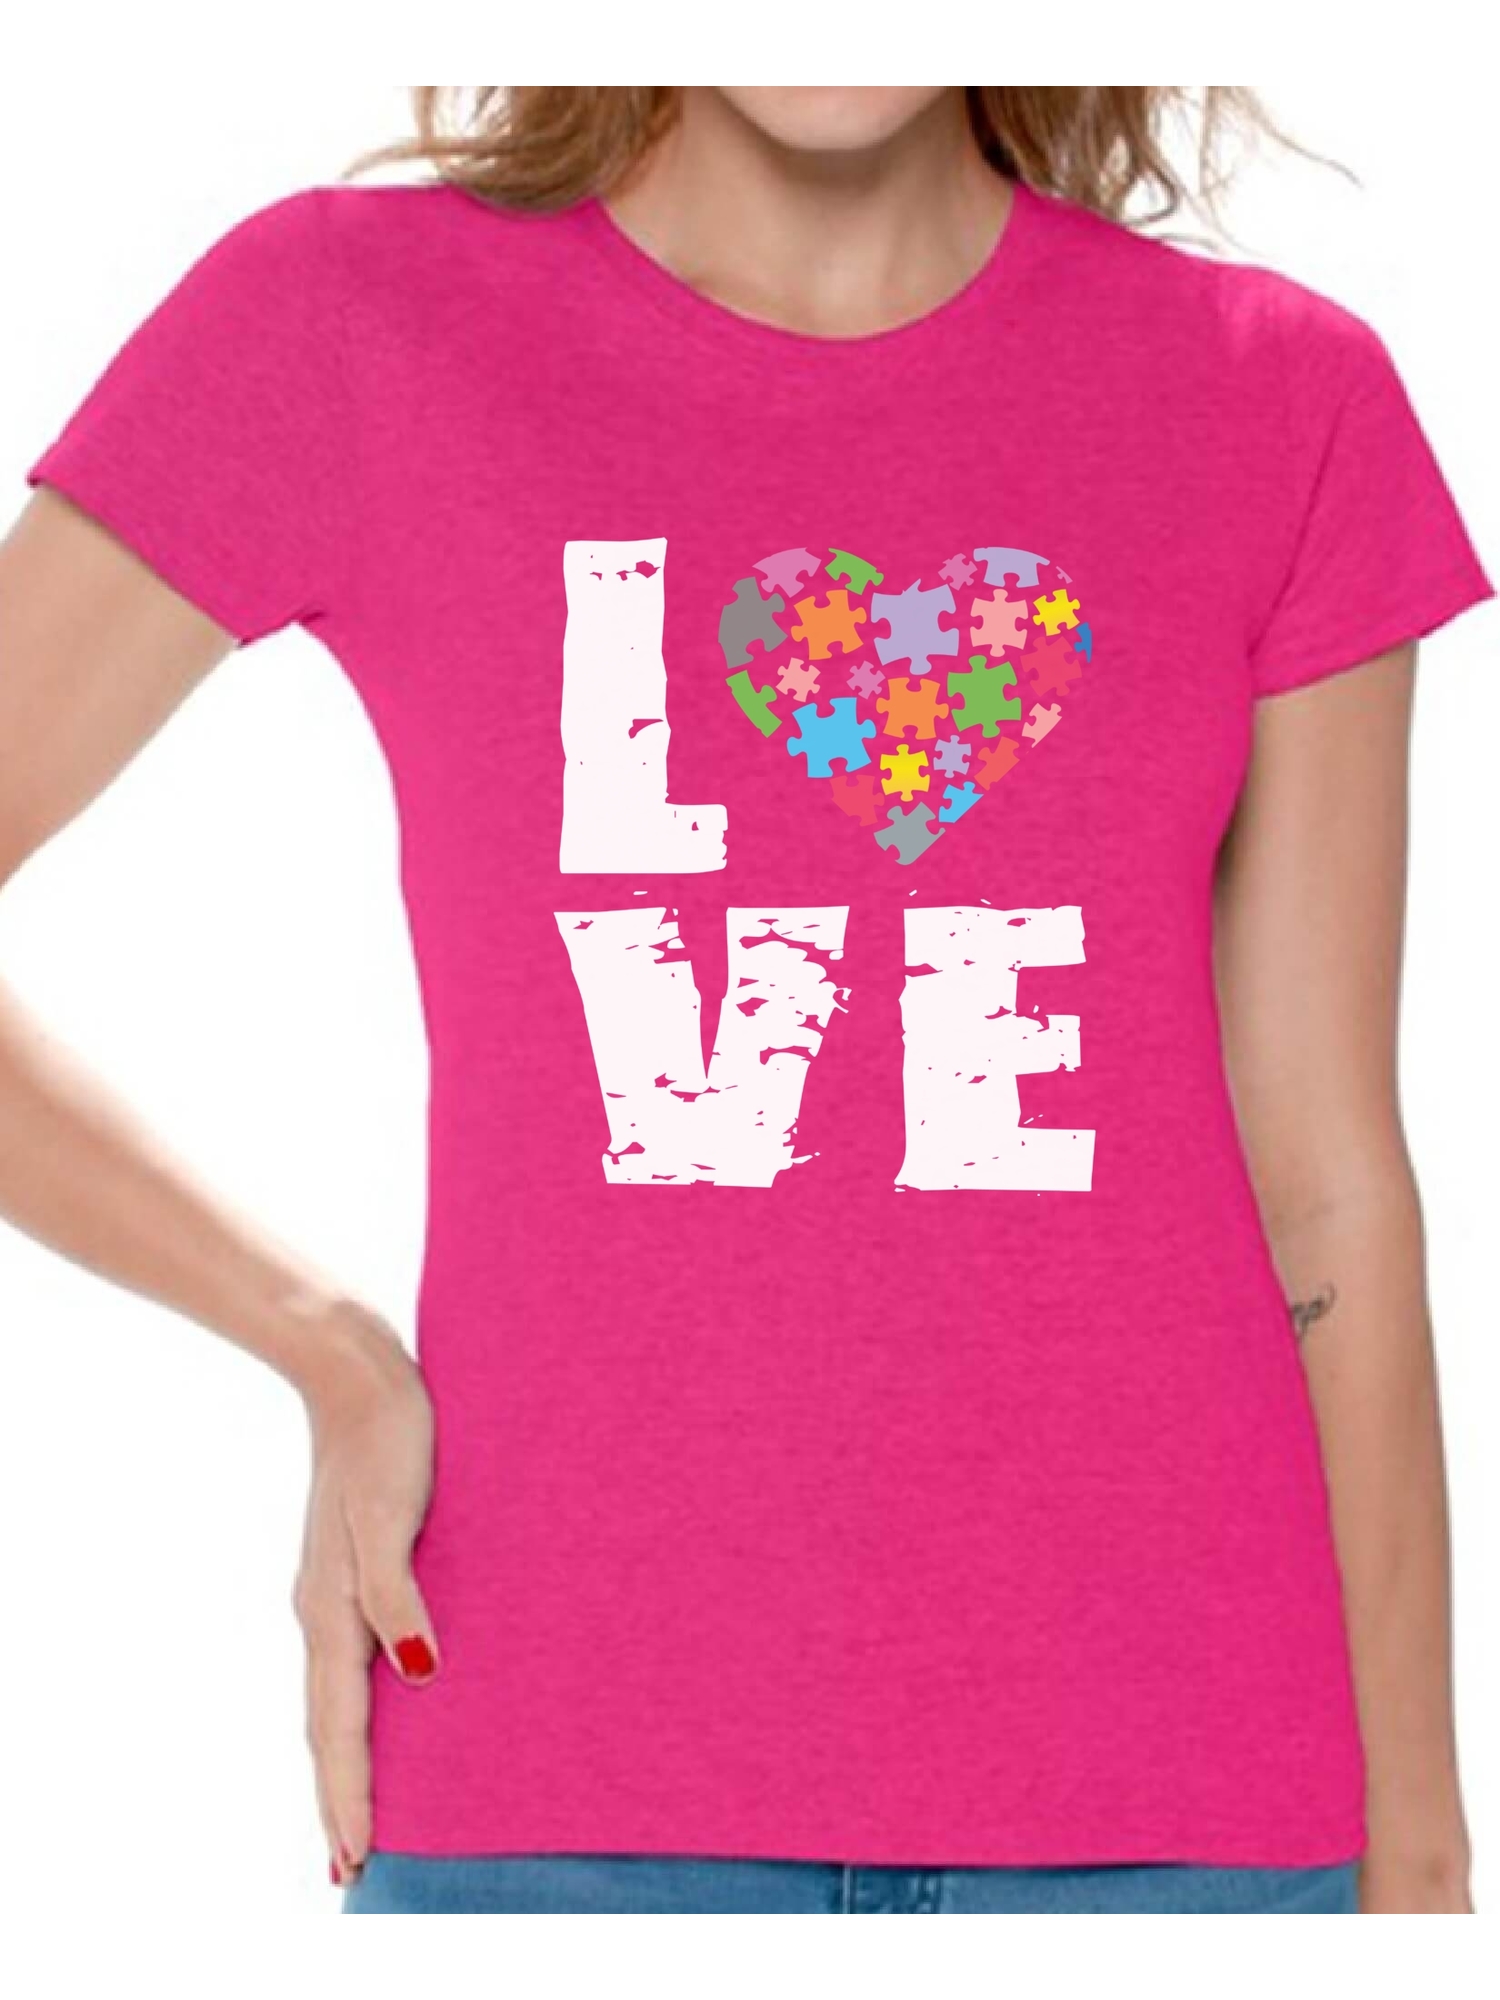 Awkward Styles Women's Love Puzzles Autism Awareness Graphic T-shirt Tops Autistic Support - image 1 of 4